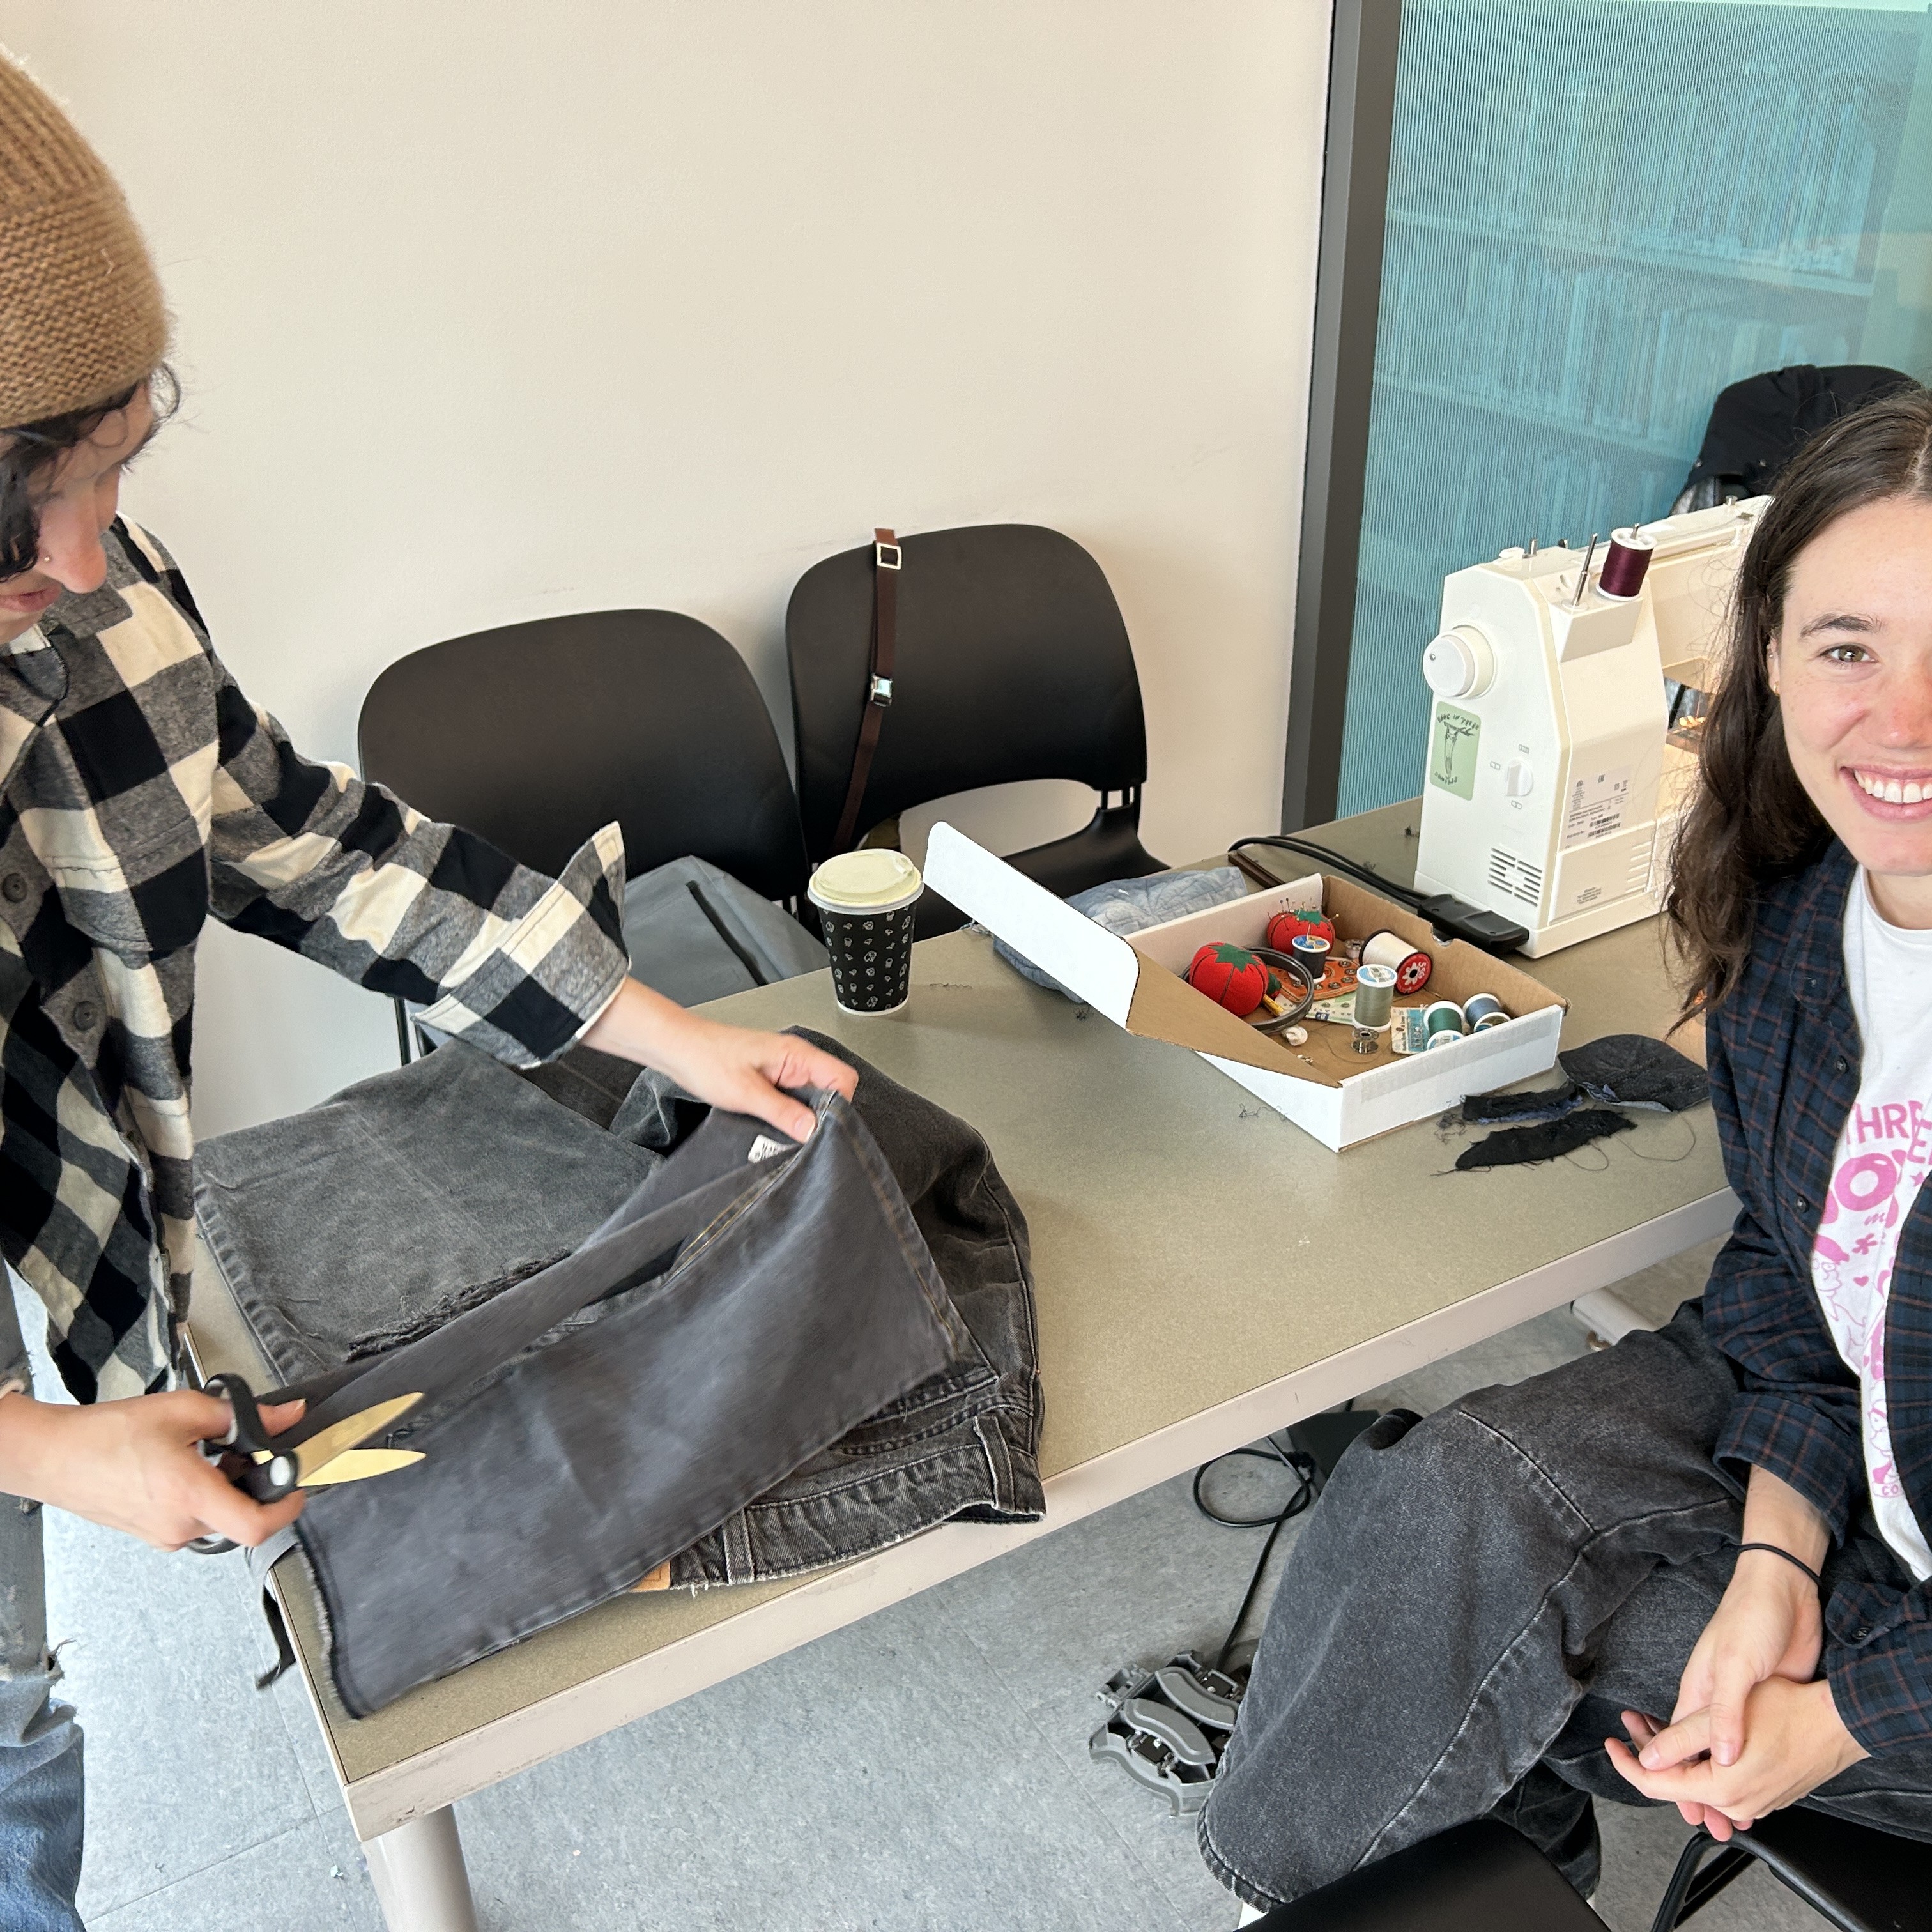 Two people are working on a clothing item with a sewing machine and scissors